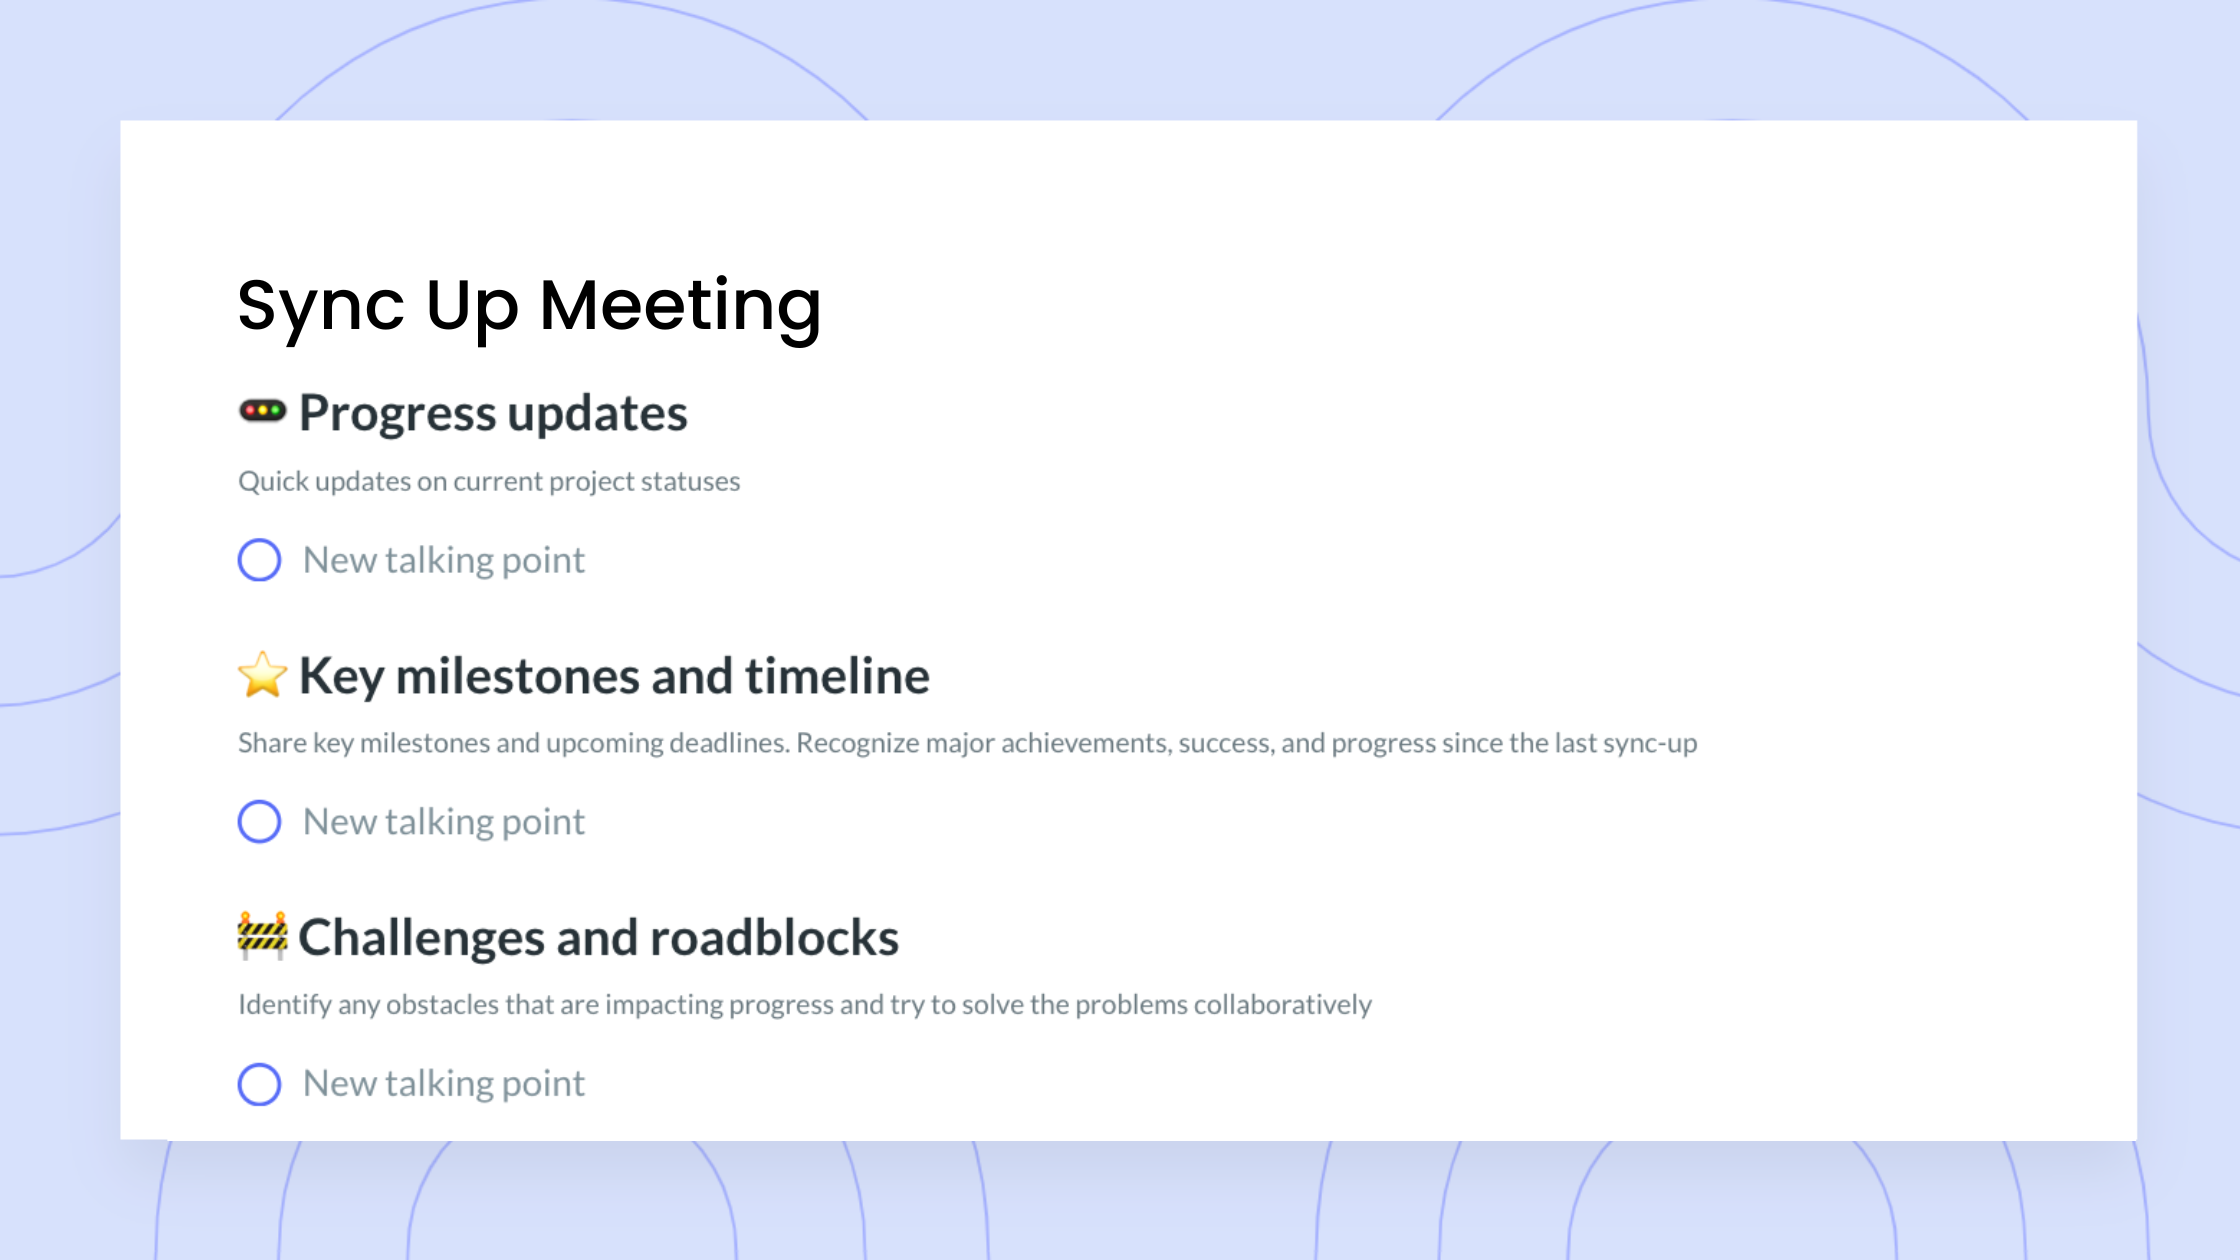 Sync Up Meeting Agenda Template